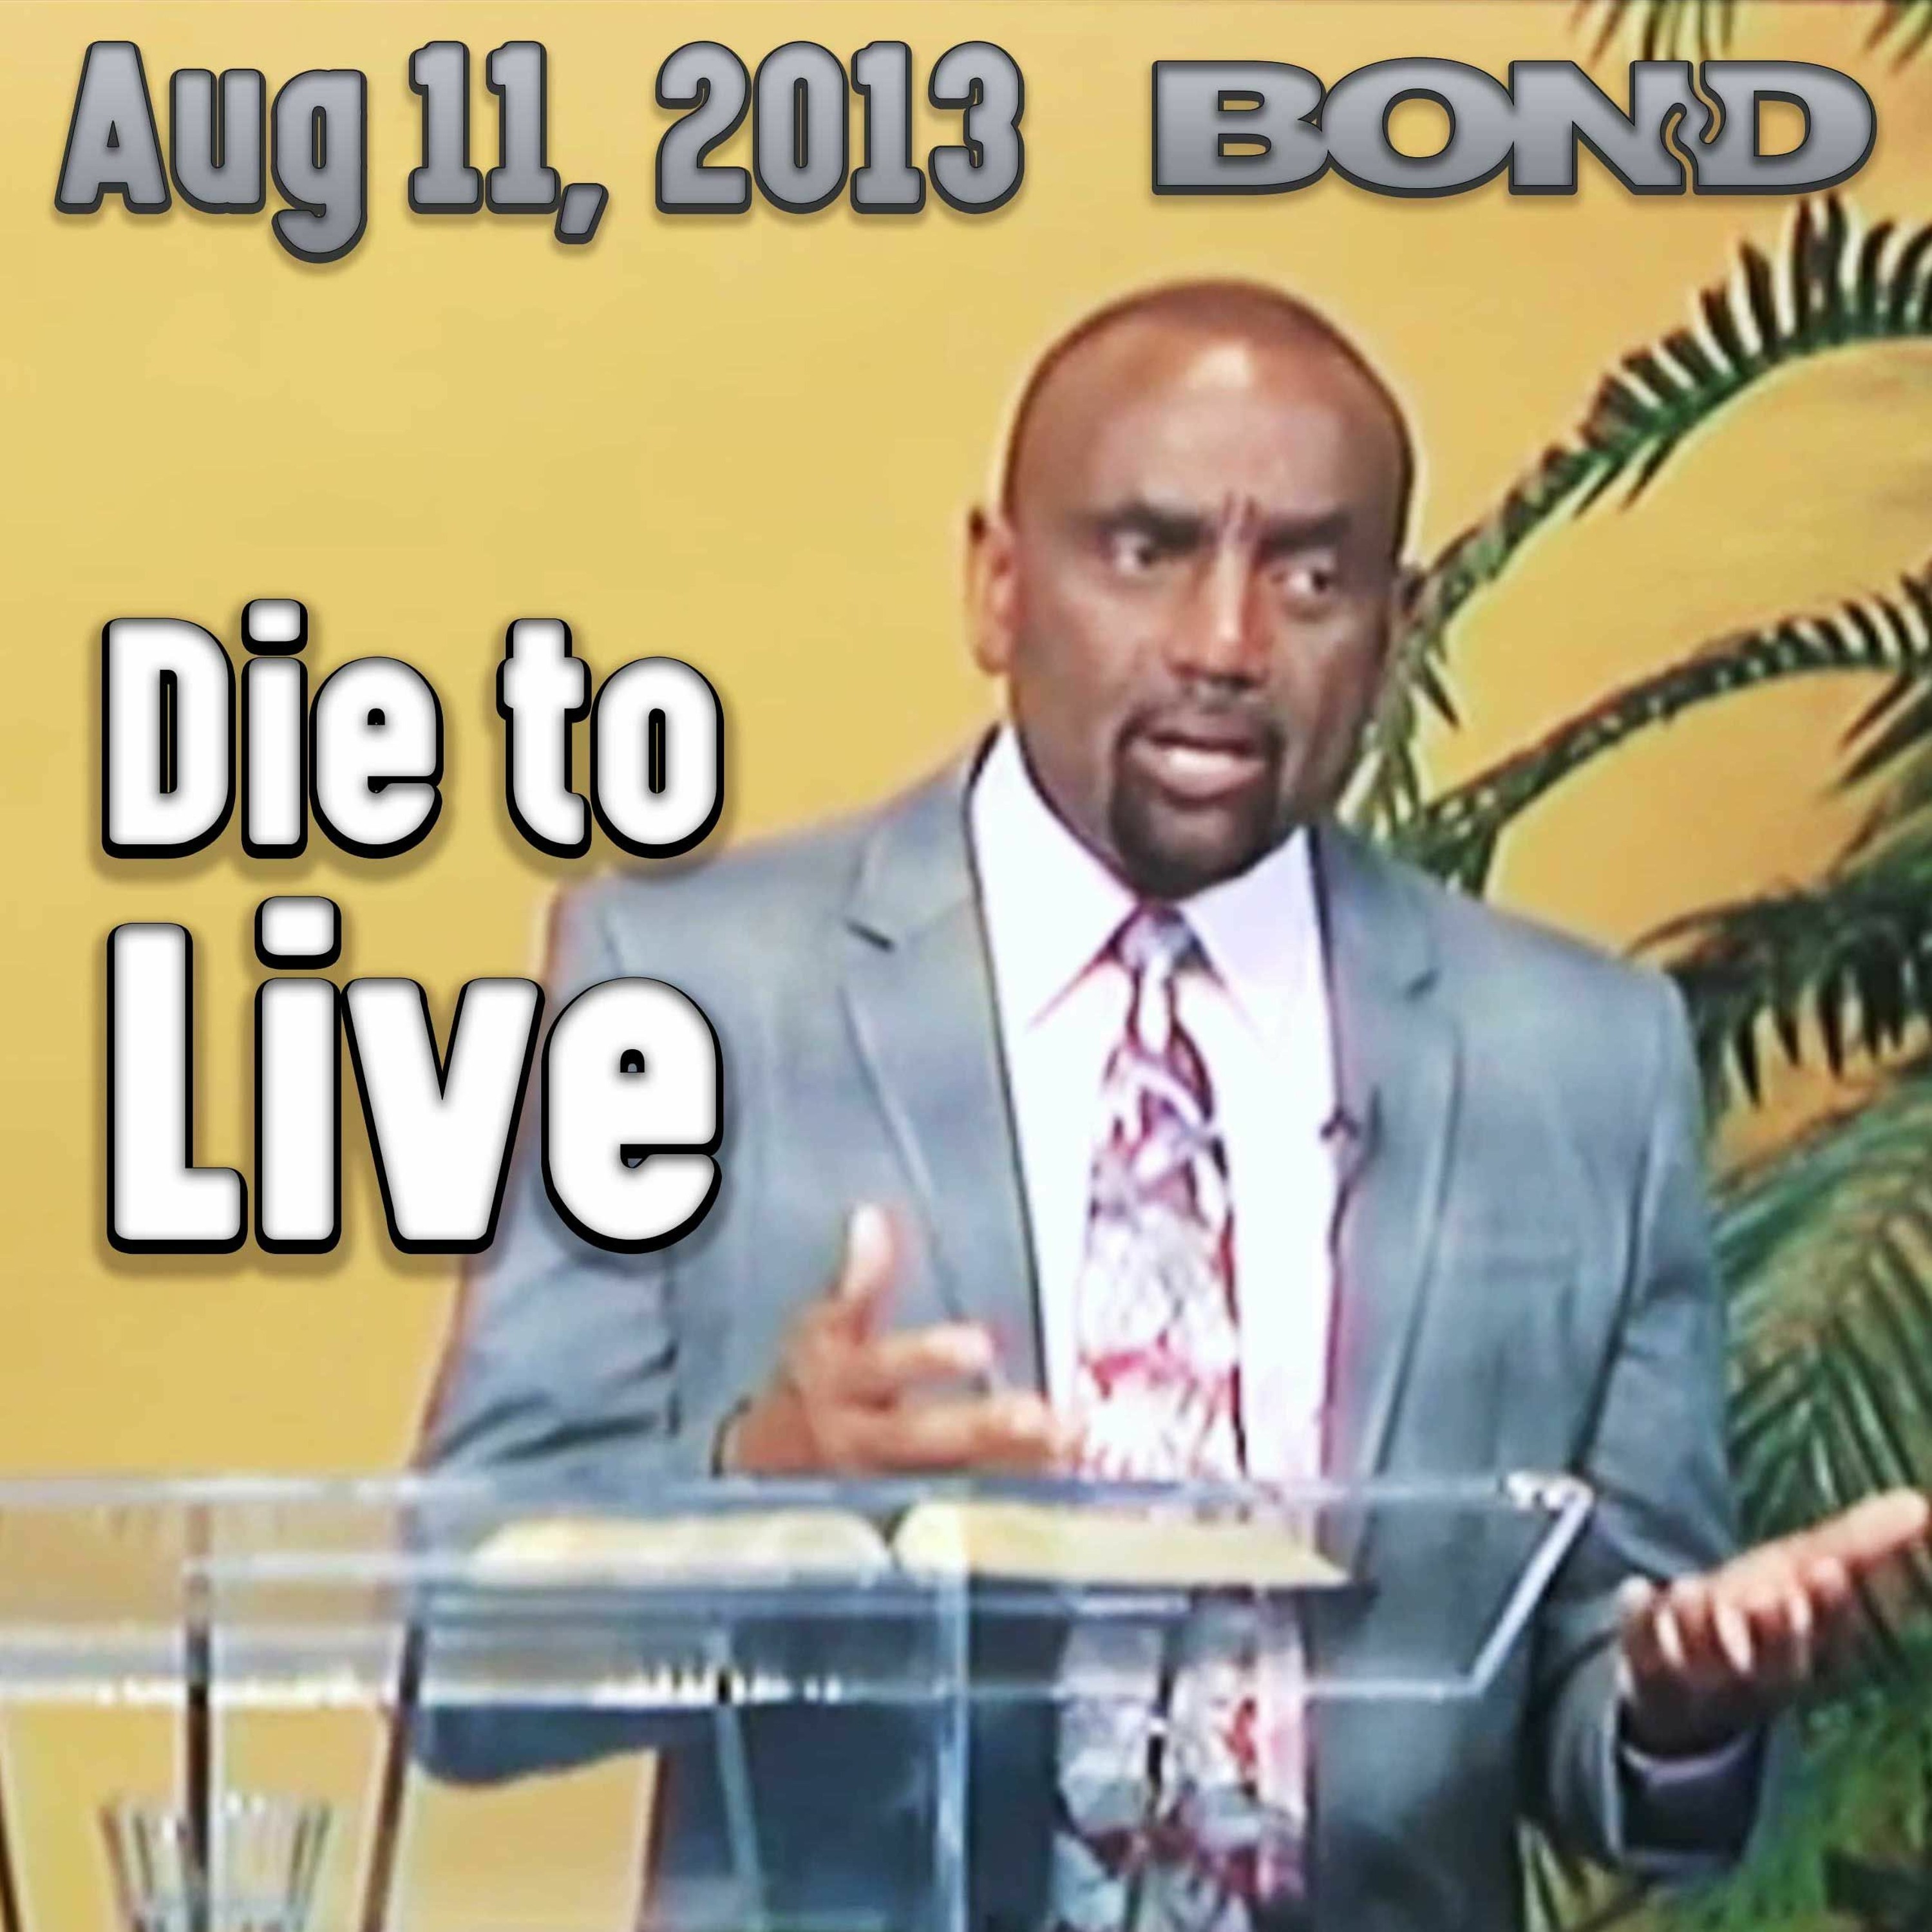 Christ Said in Order to Live You Must Die. How Do You Do That? (Archive 8/11/13)